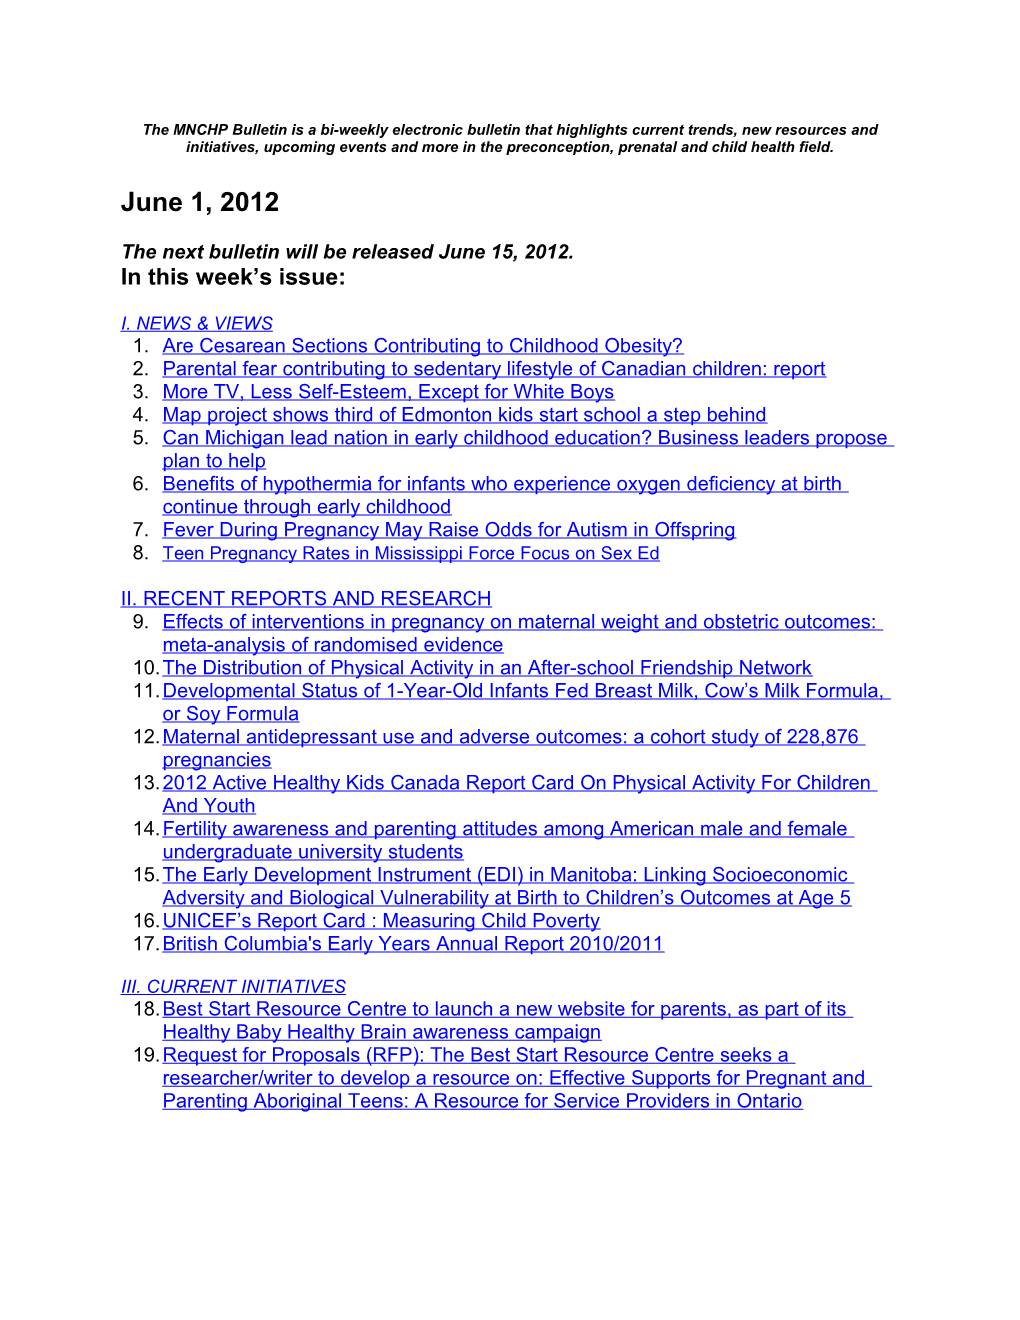 The Next Bulletin Will Be Releasedjune 15, 2012